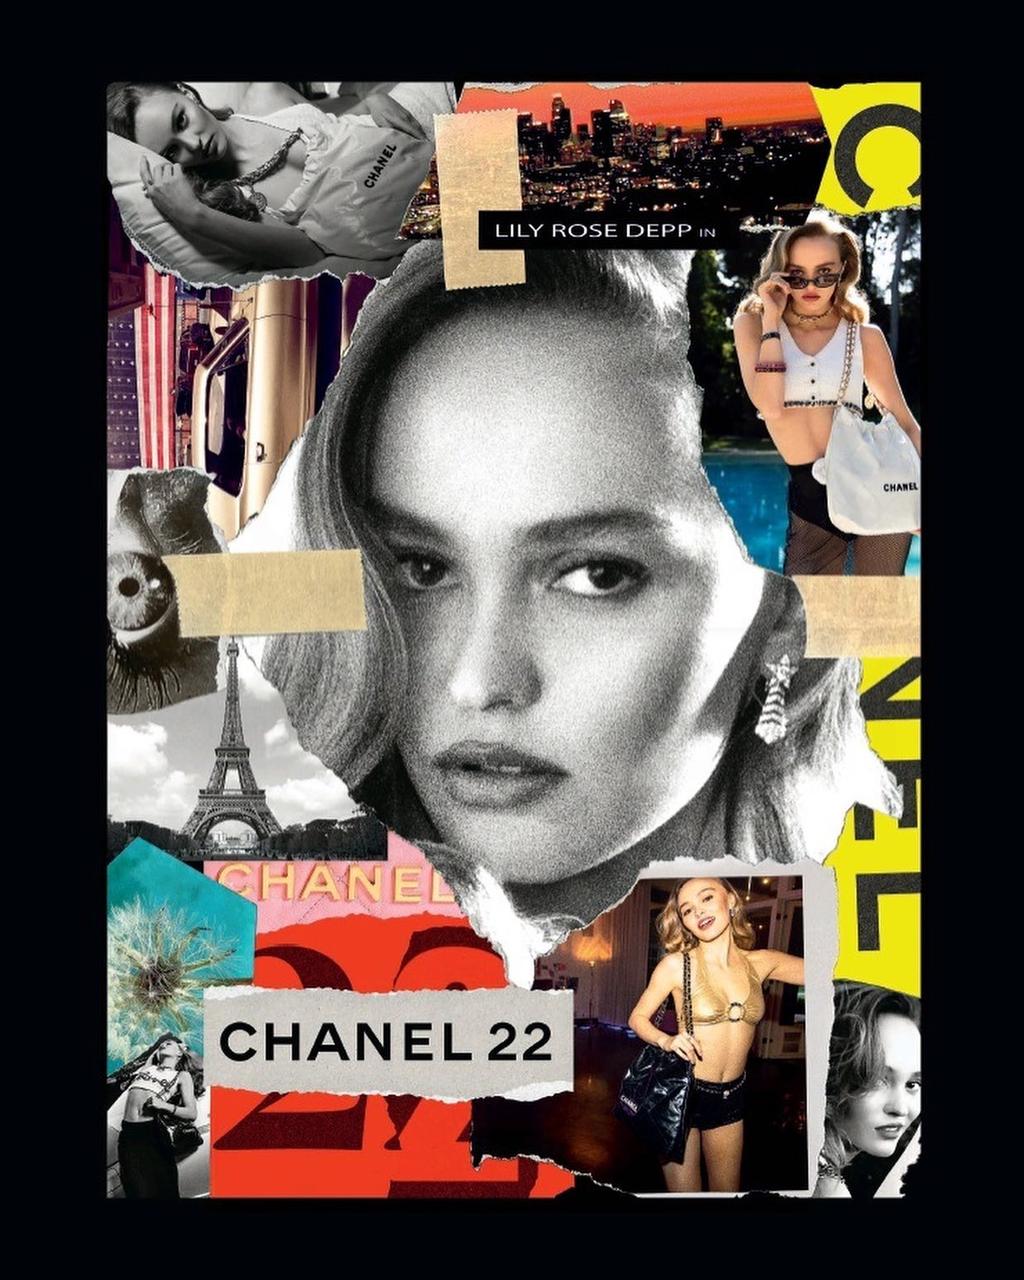 Chanel's collage campaign with Lily Rose Depp